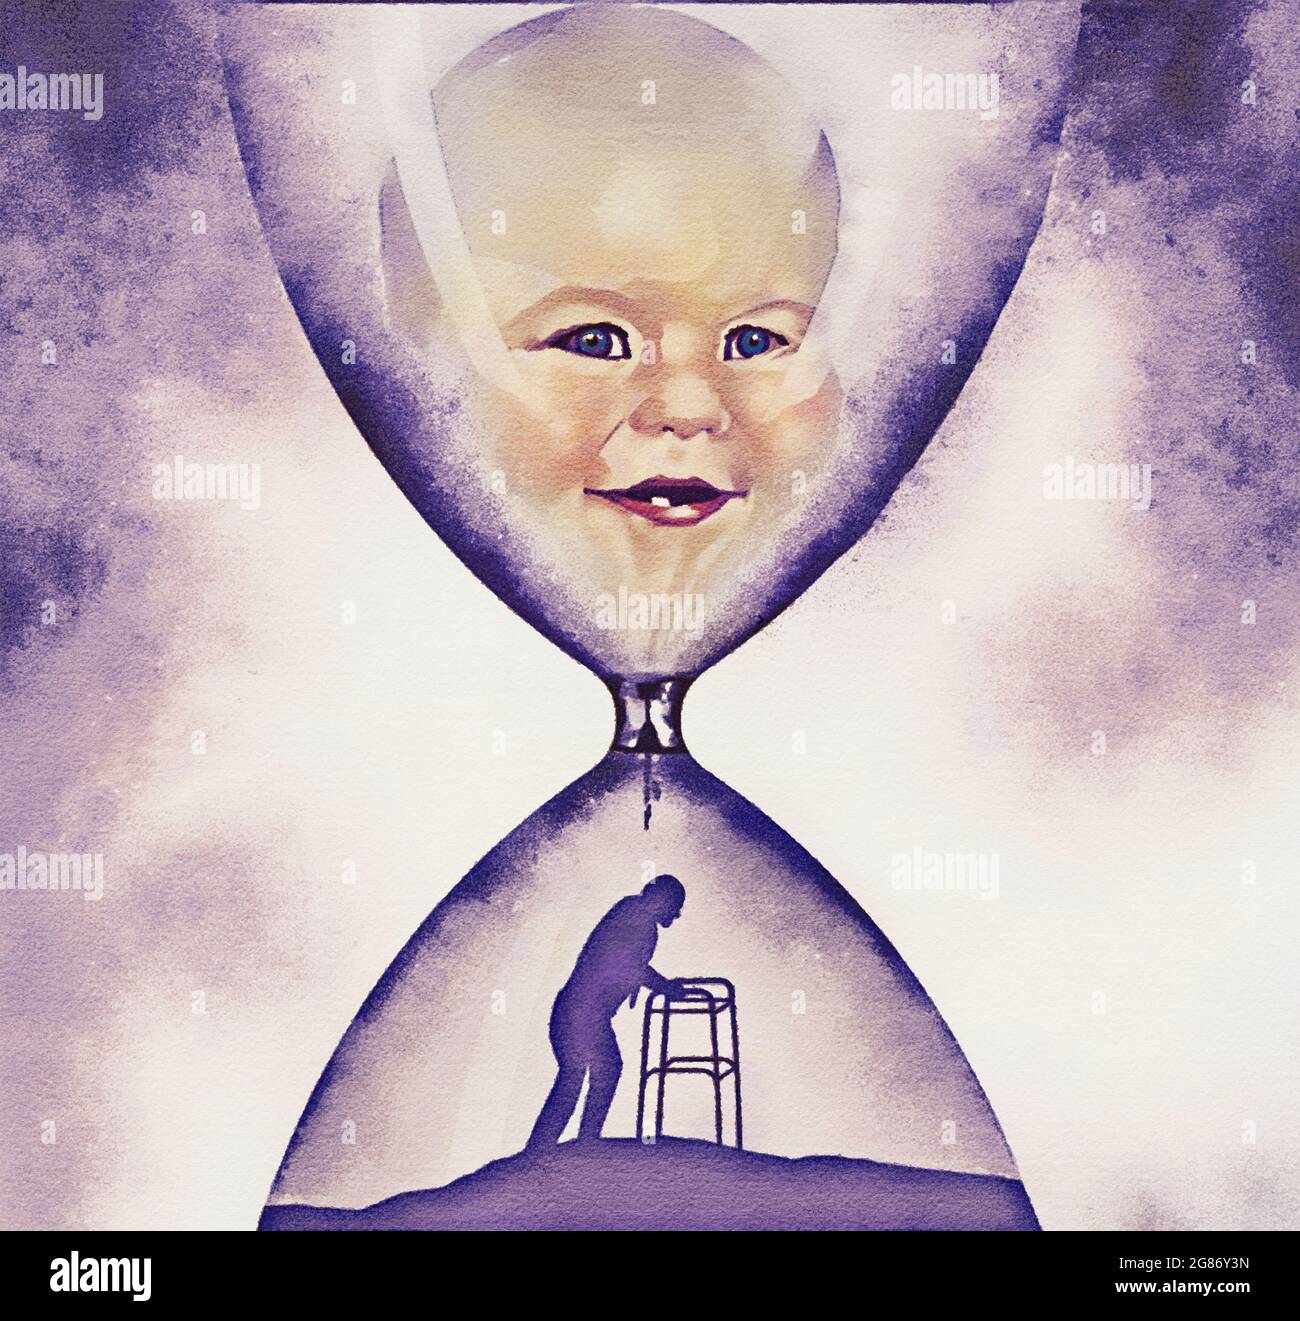 A baby’s face is in the top of an hourglass and below is an old man he becomes over time in this 3-d illustration about aging. Stock Photo